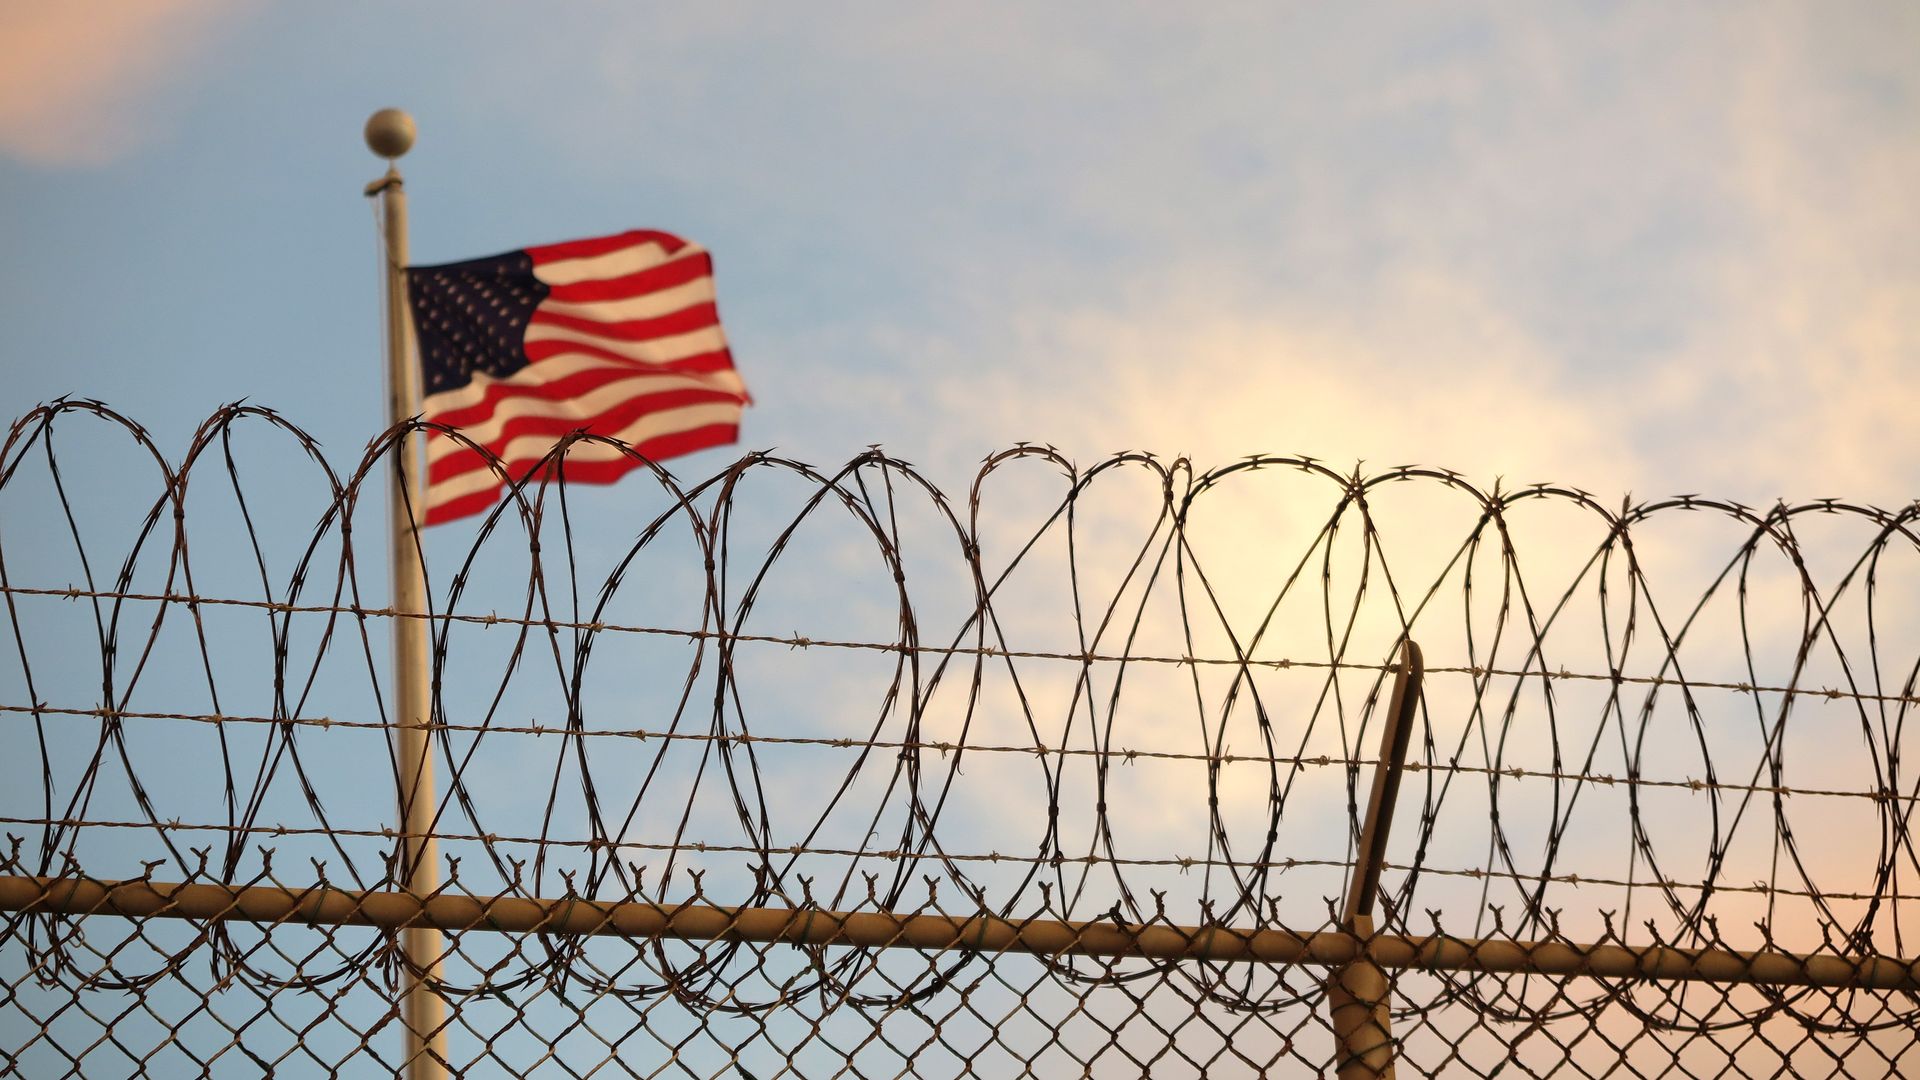 Photo of an American flag flying on a pole behind barbed wire